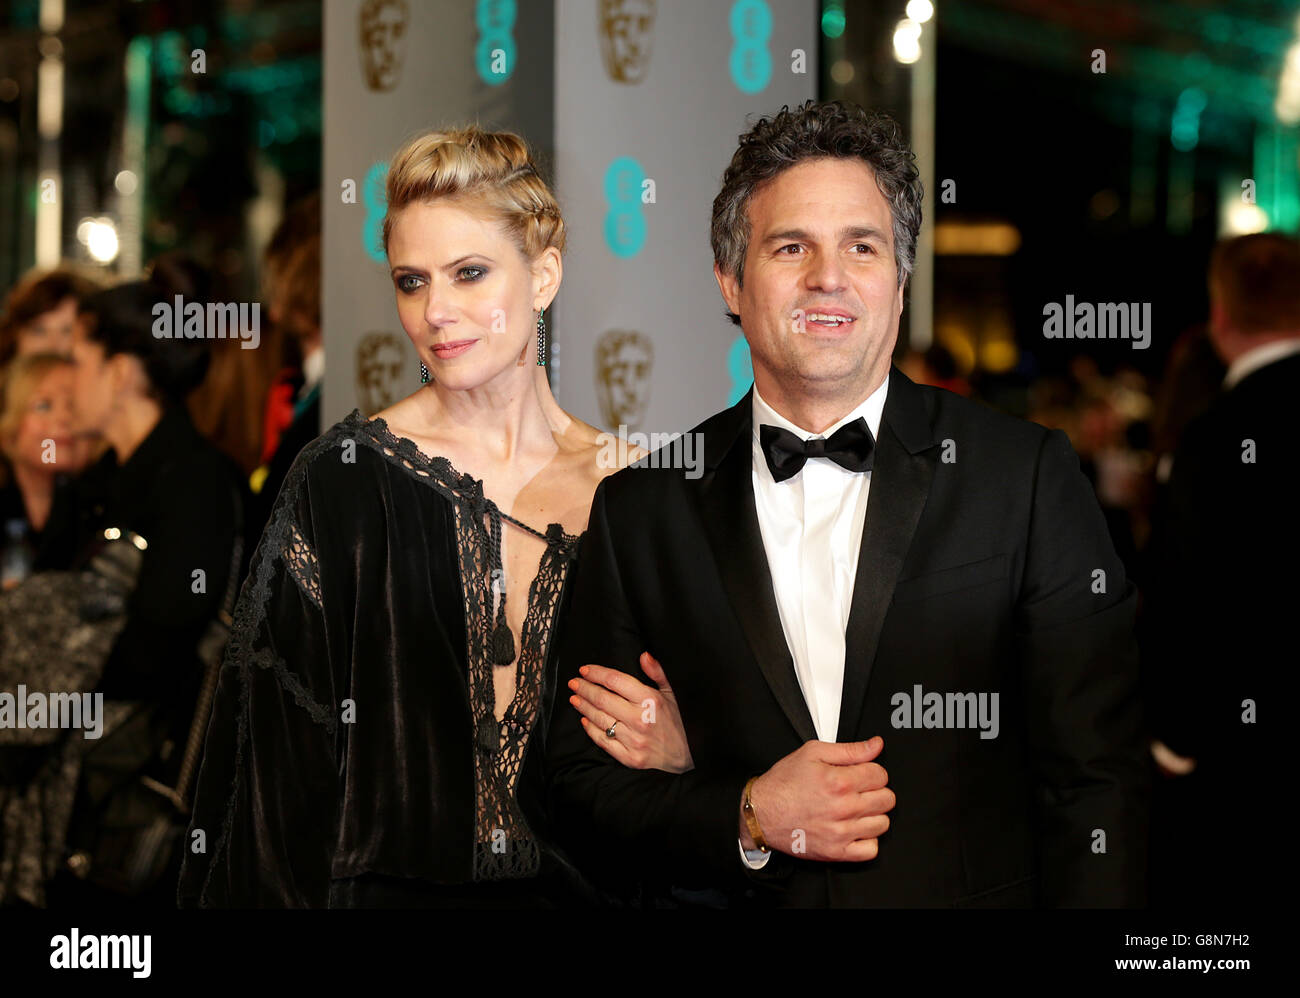 Mark Ruffalo and Sunrise Coigney attending the EE British Academy Film Awards at the Royal Opera House, Bow Street, London. PRESS ASSOCIATION Photo. Picture date: Sunday February 14, 2016. See PA Story SHOWBIZ Baftas. Photo credit should read: Yui Mok/PA Wire Stock Photo